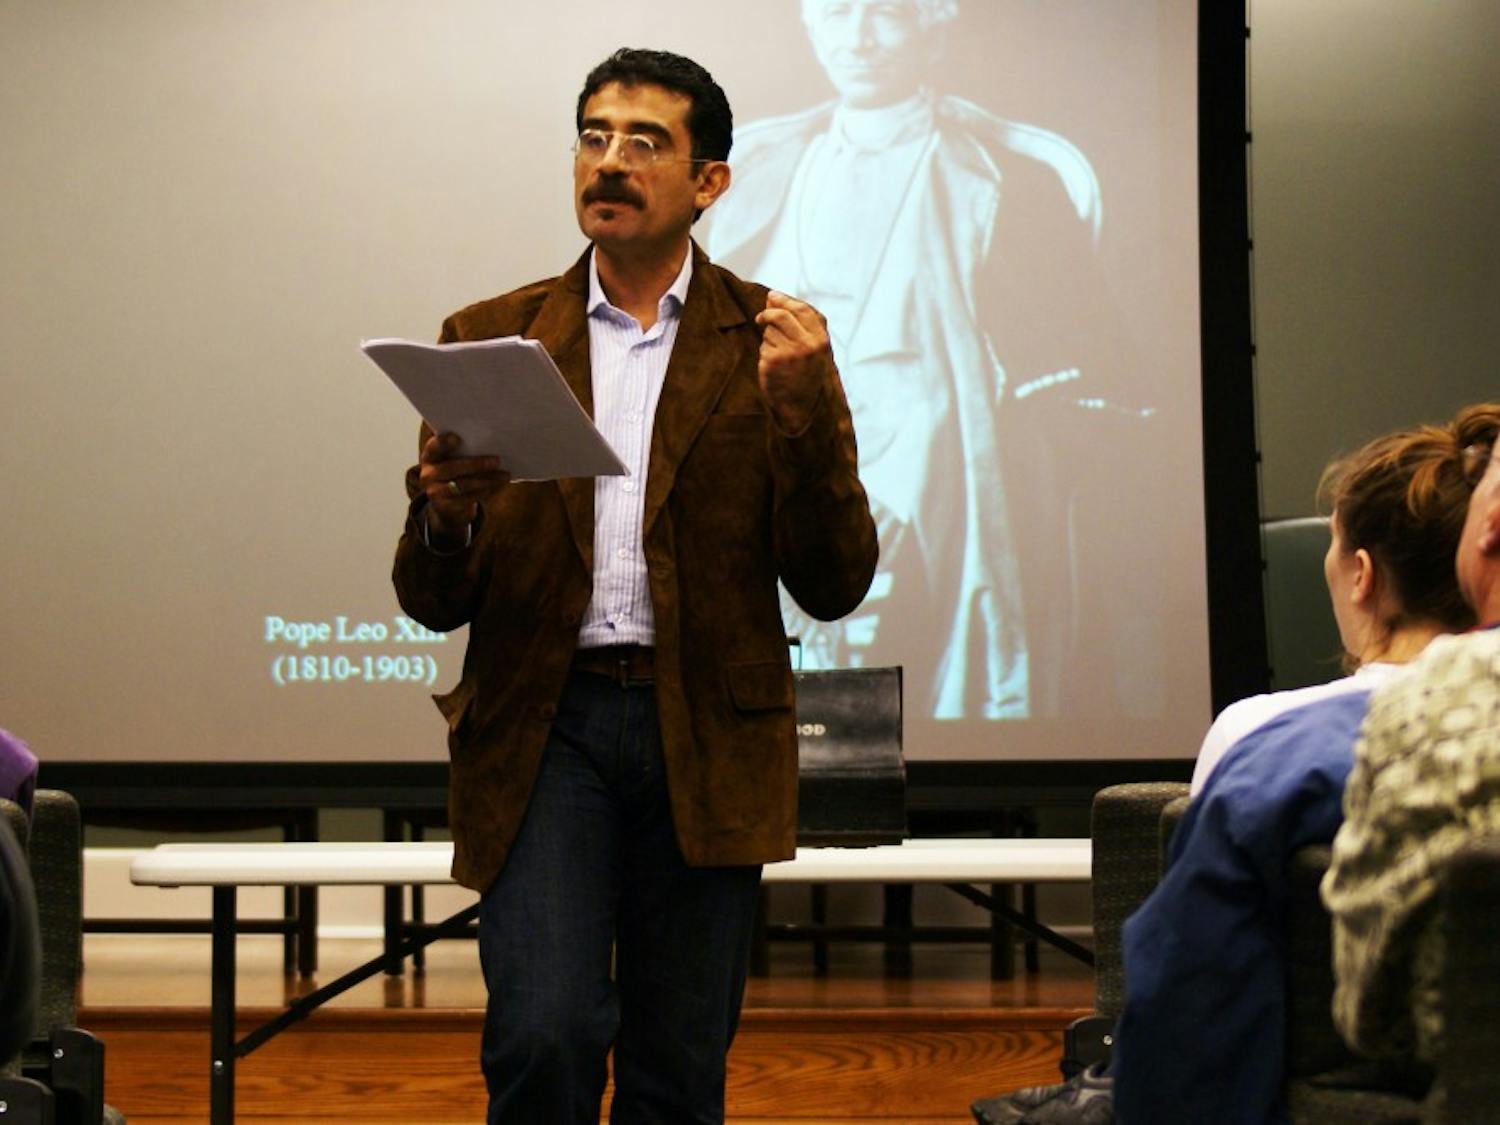 Gabriel Garcia Marquez speaks to a free and eager audience about the background, writings, and importance of Vargas Vila on October 14th in the Wilson Library.